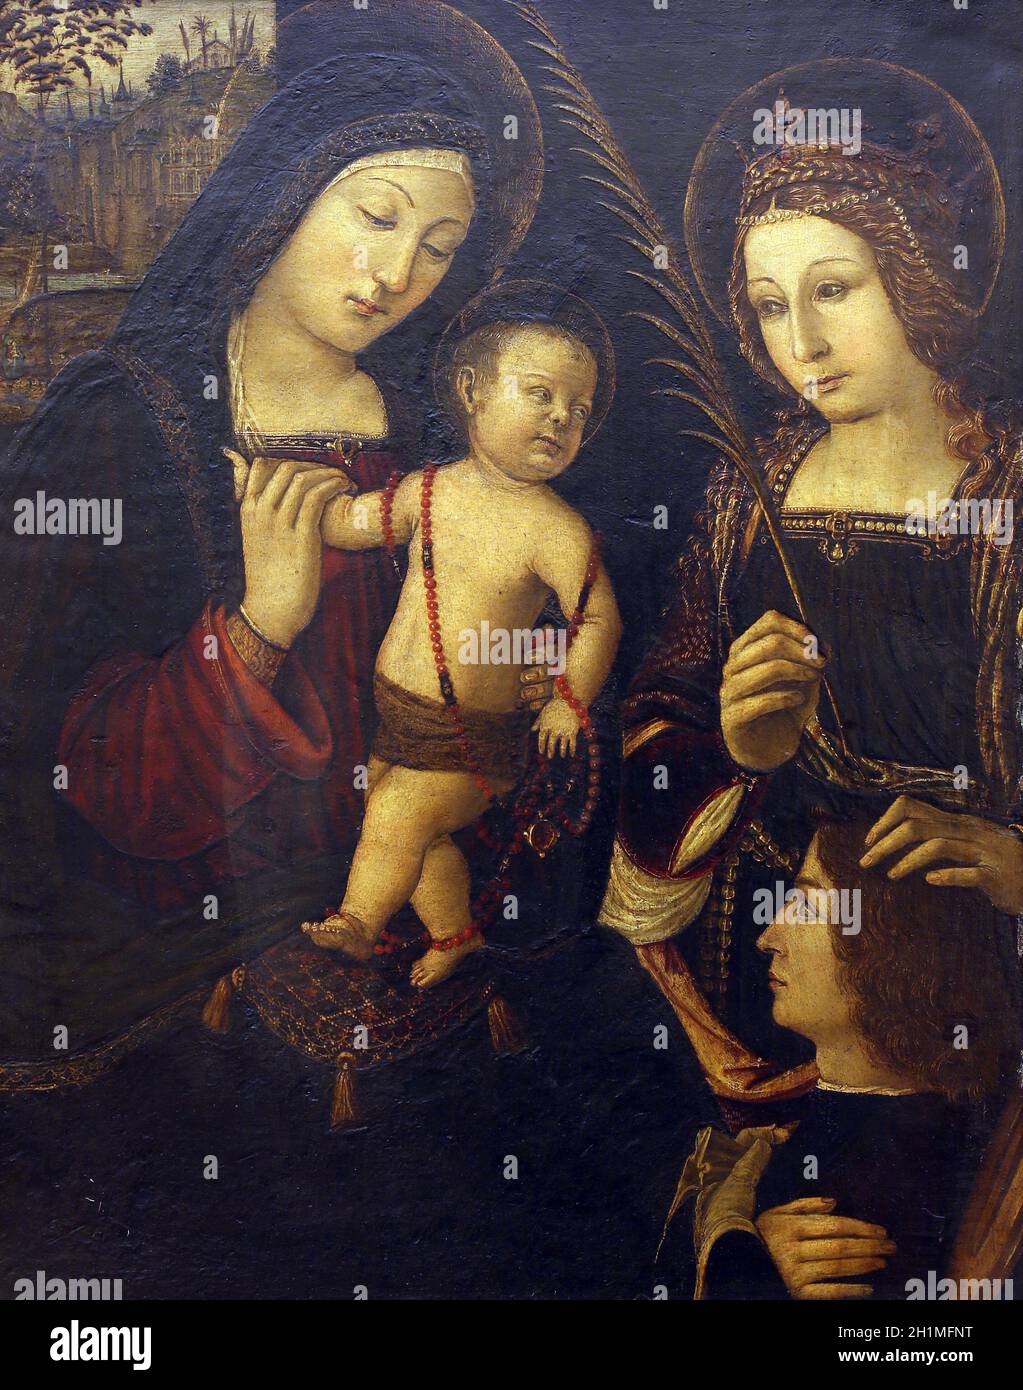 ZAGREB, CROATIA - DECEMBER 08: Jacopo Palma il Vecchio: Madonna and Child with St. Catherine, Old Masters Collection, Croatian Academy of Sciences, De Stock Photo